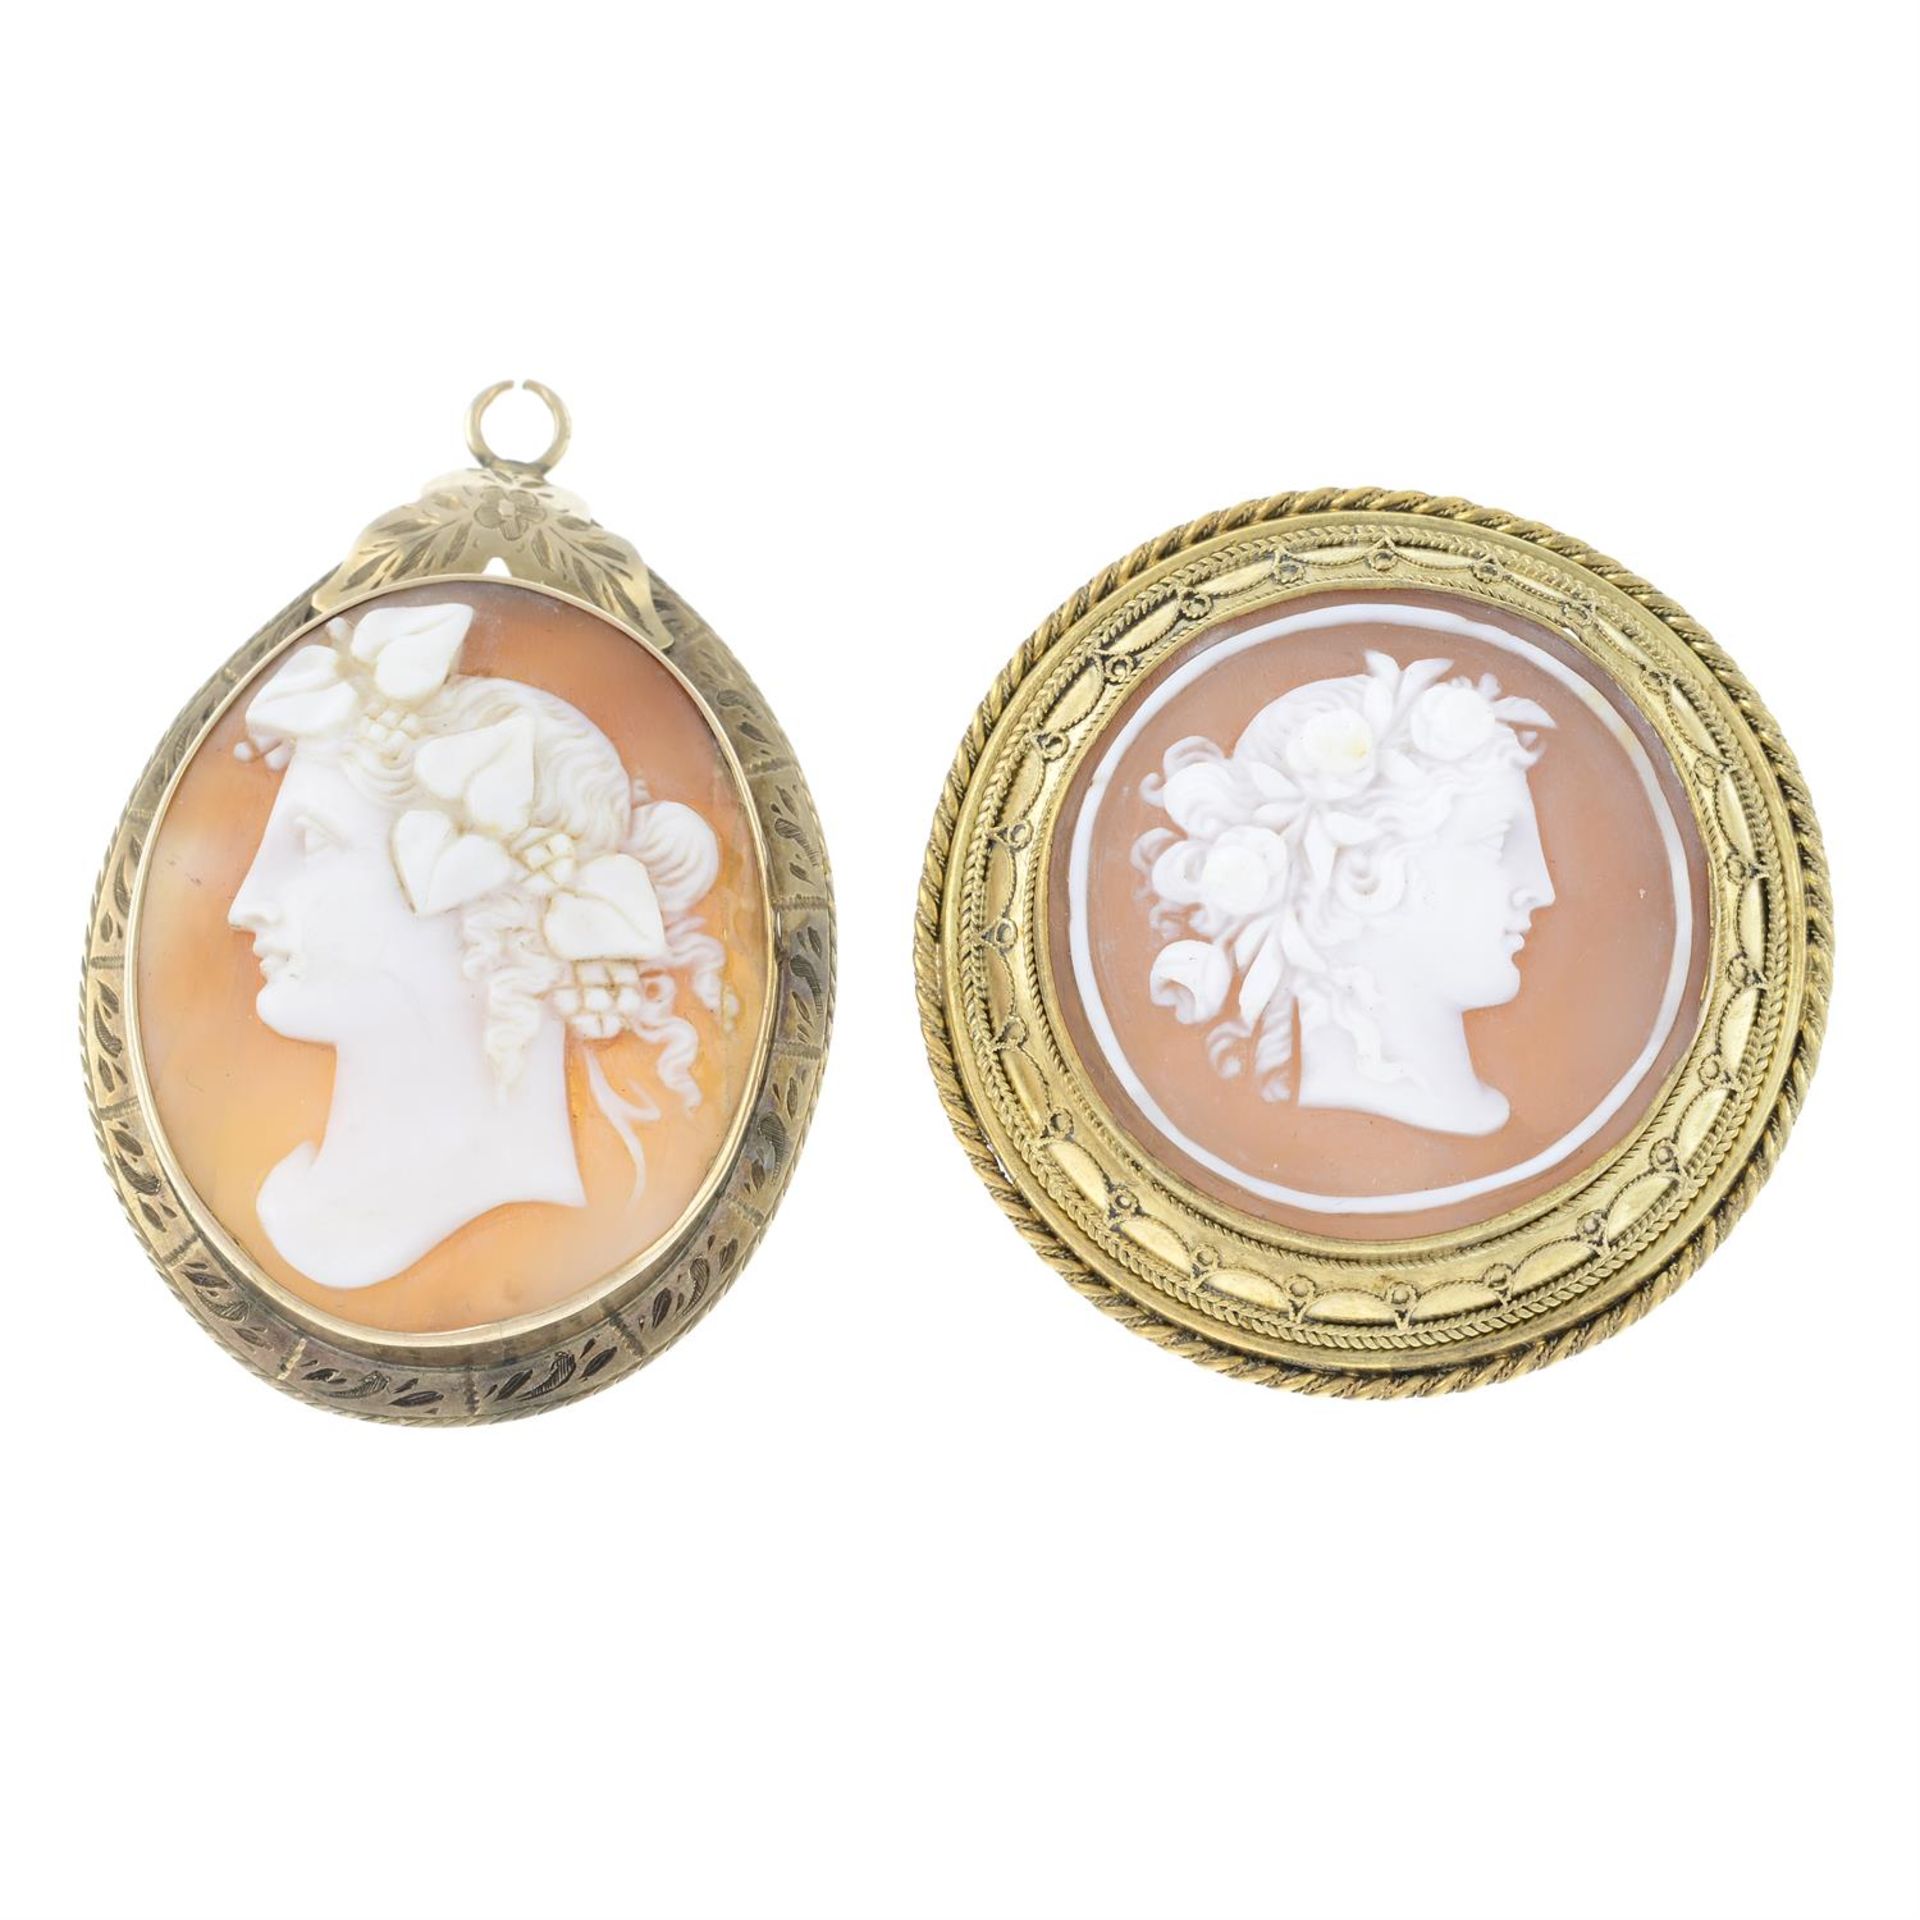 Two pieces of late 19th century and later shell cameo jewellery, depicting a Bacchante and Flora.